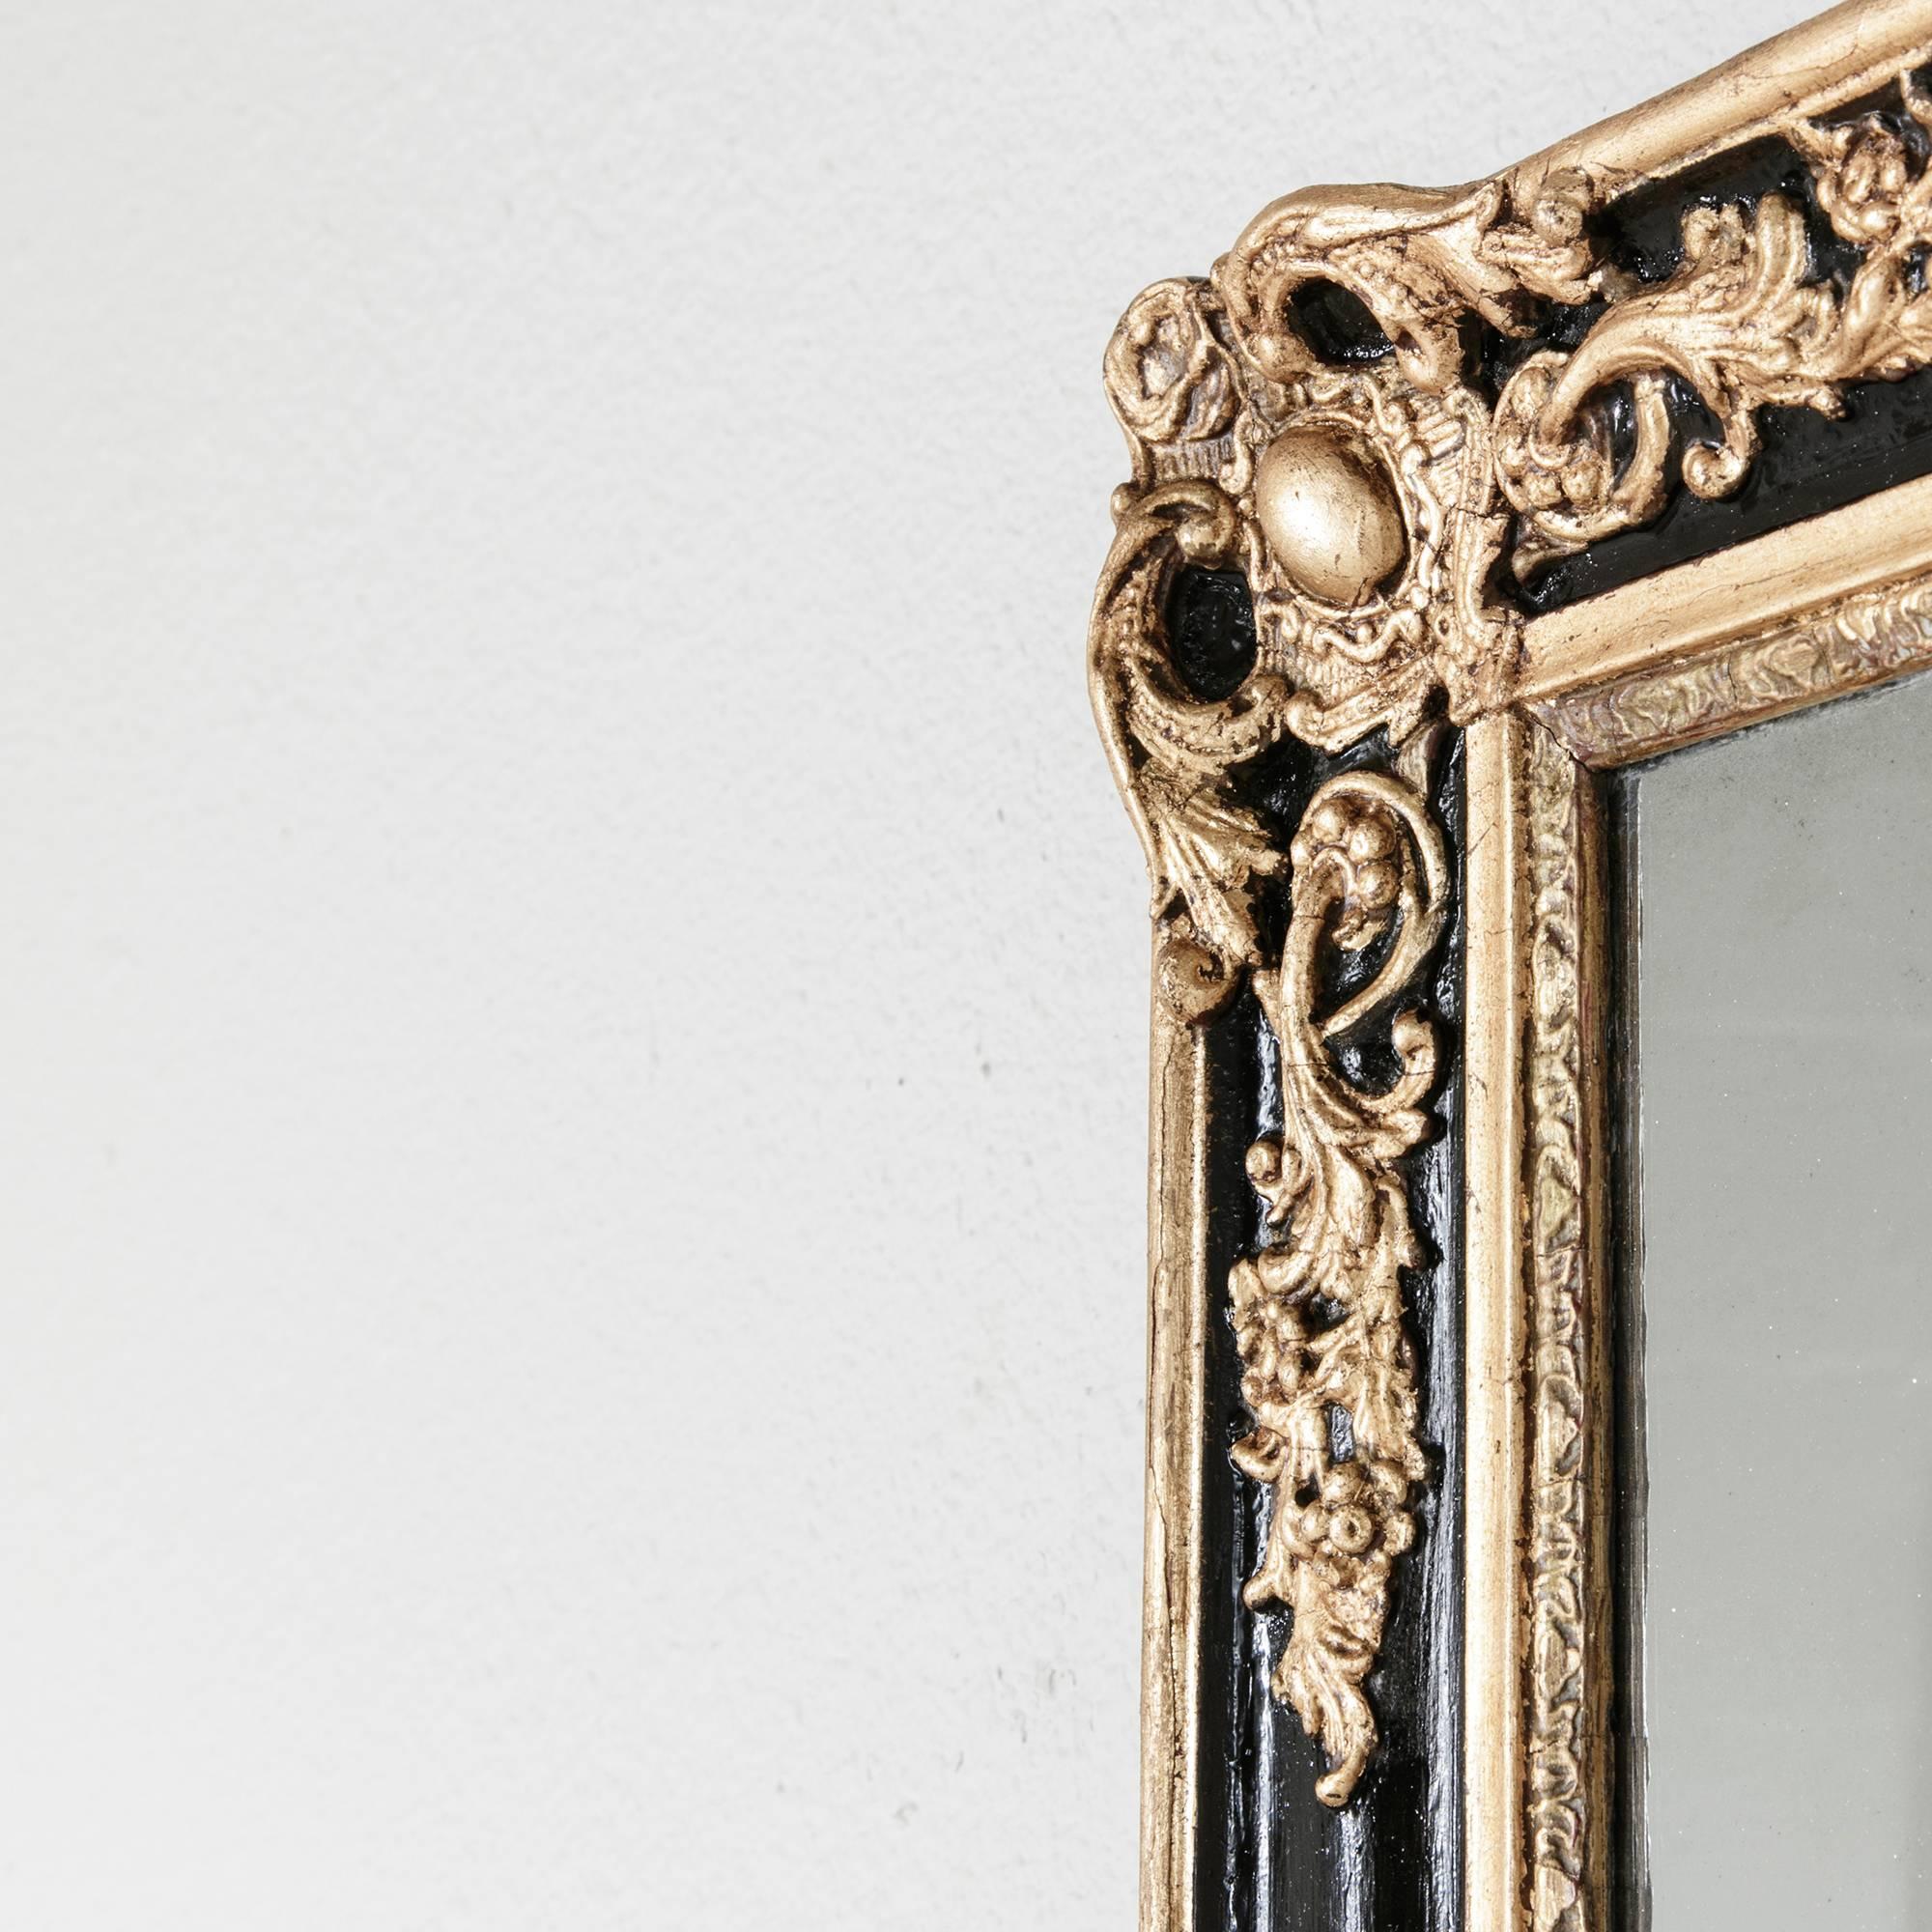 This late nineteenth century Regency style mirror features its original mercury glass. Recently refinished in black and gold leaf while still retaining its character, its hand carvings include ornate scrolls of acanthus leaves and corner medallions